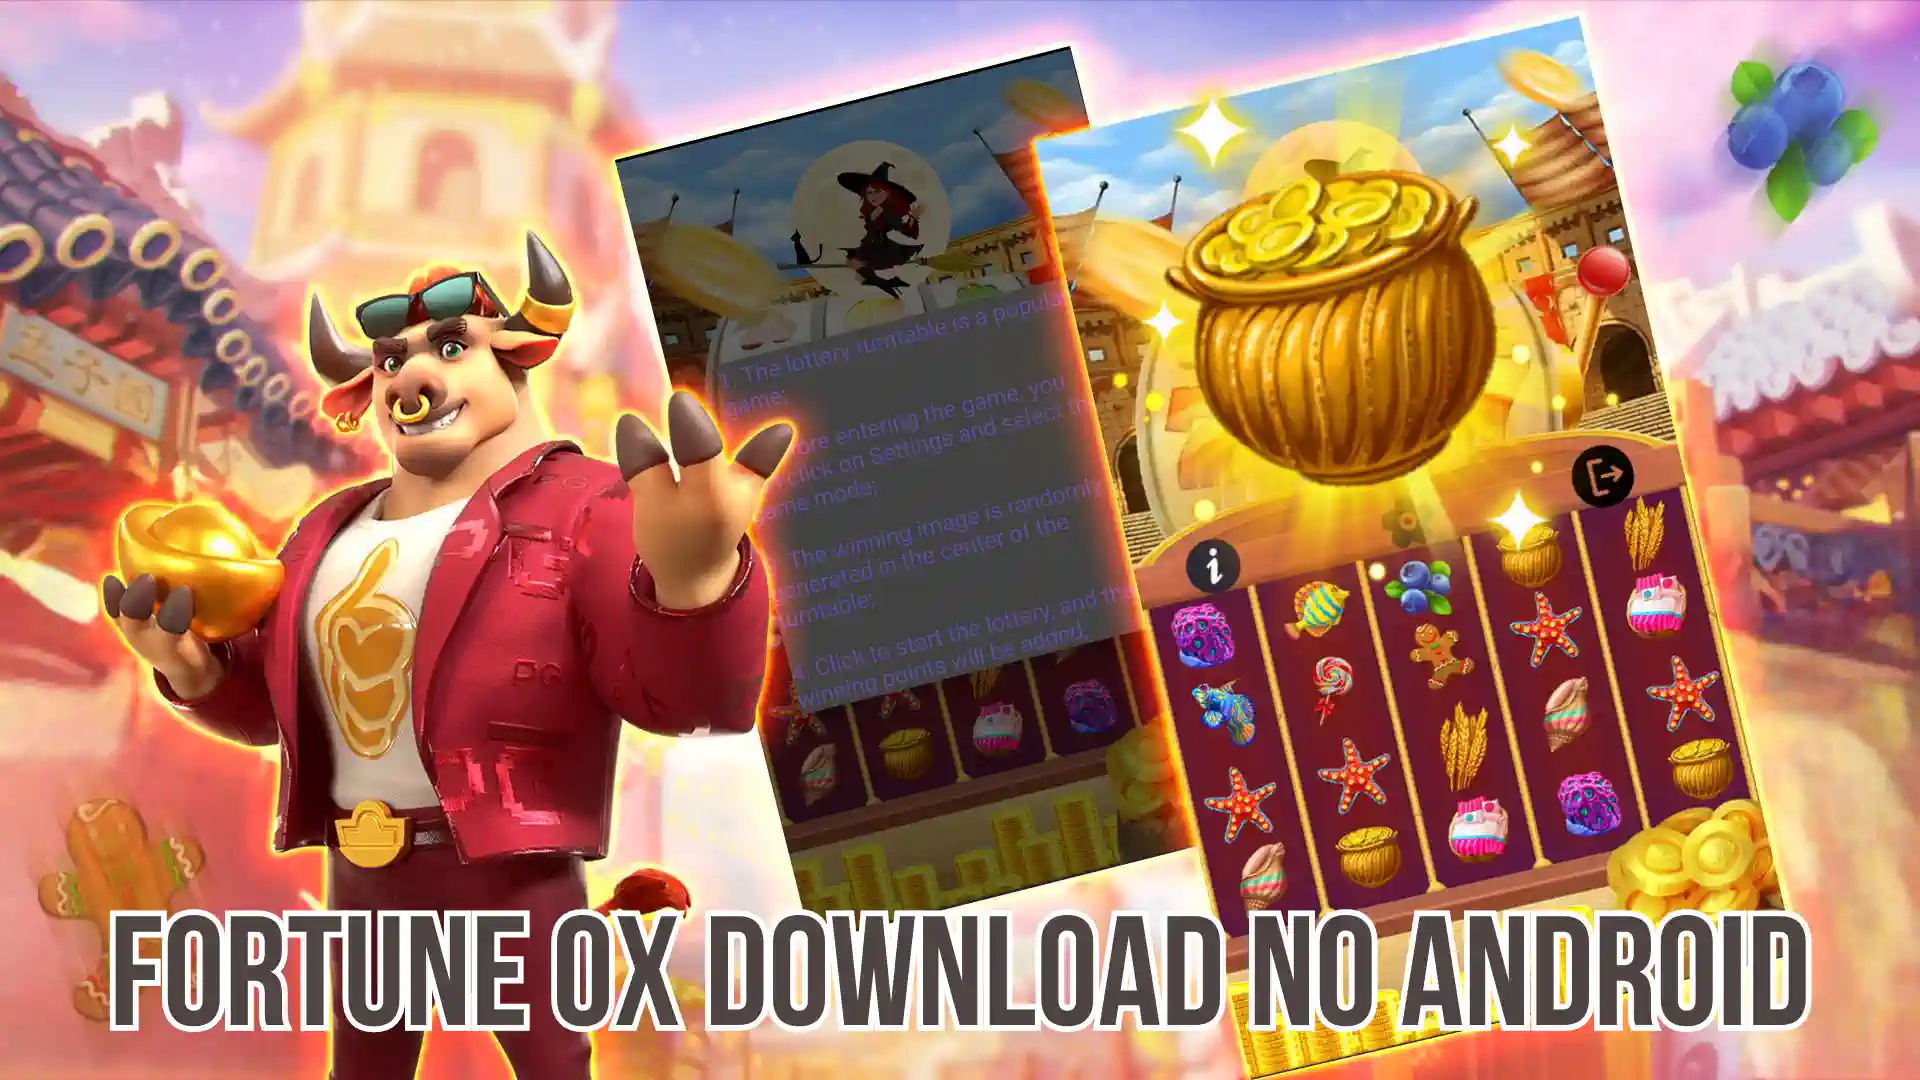 Fortune Ox download no Android